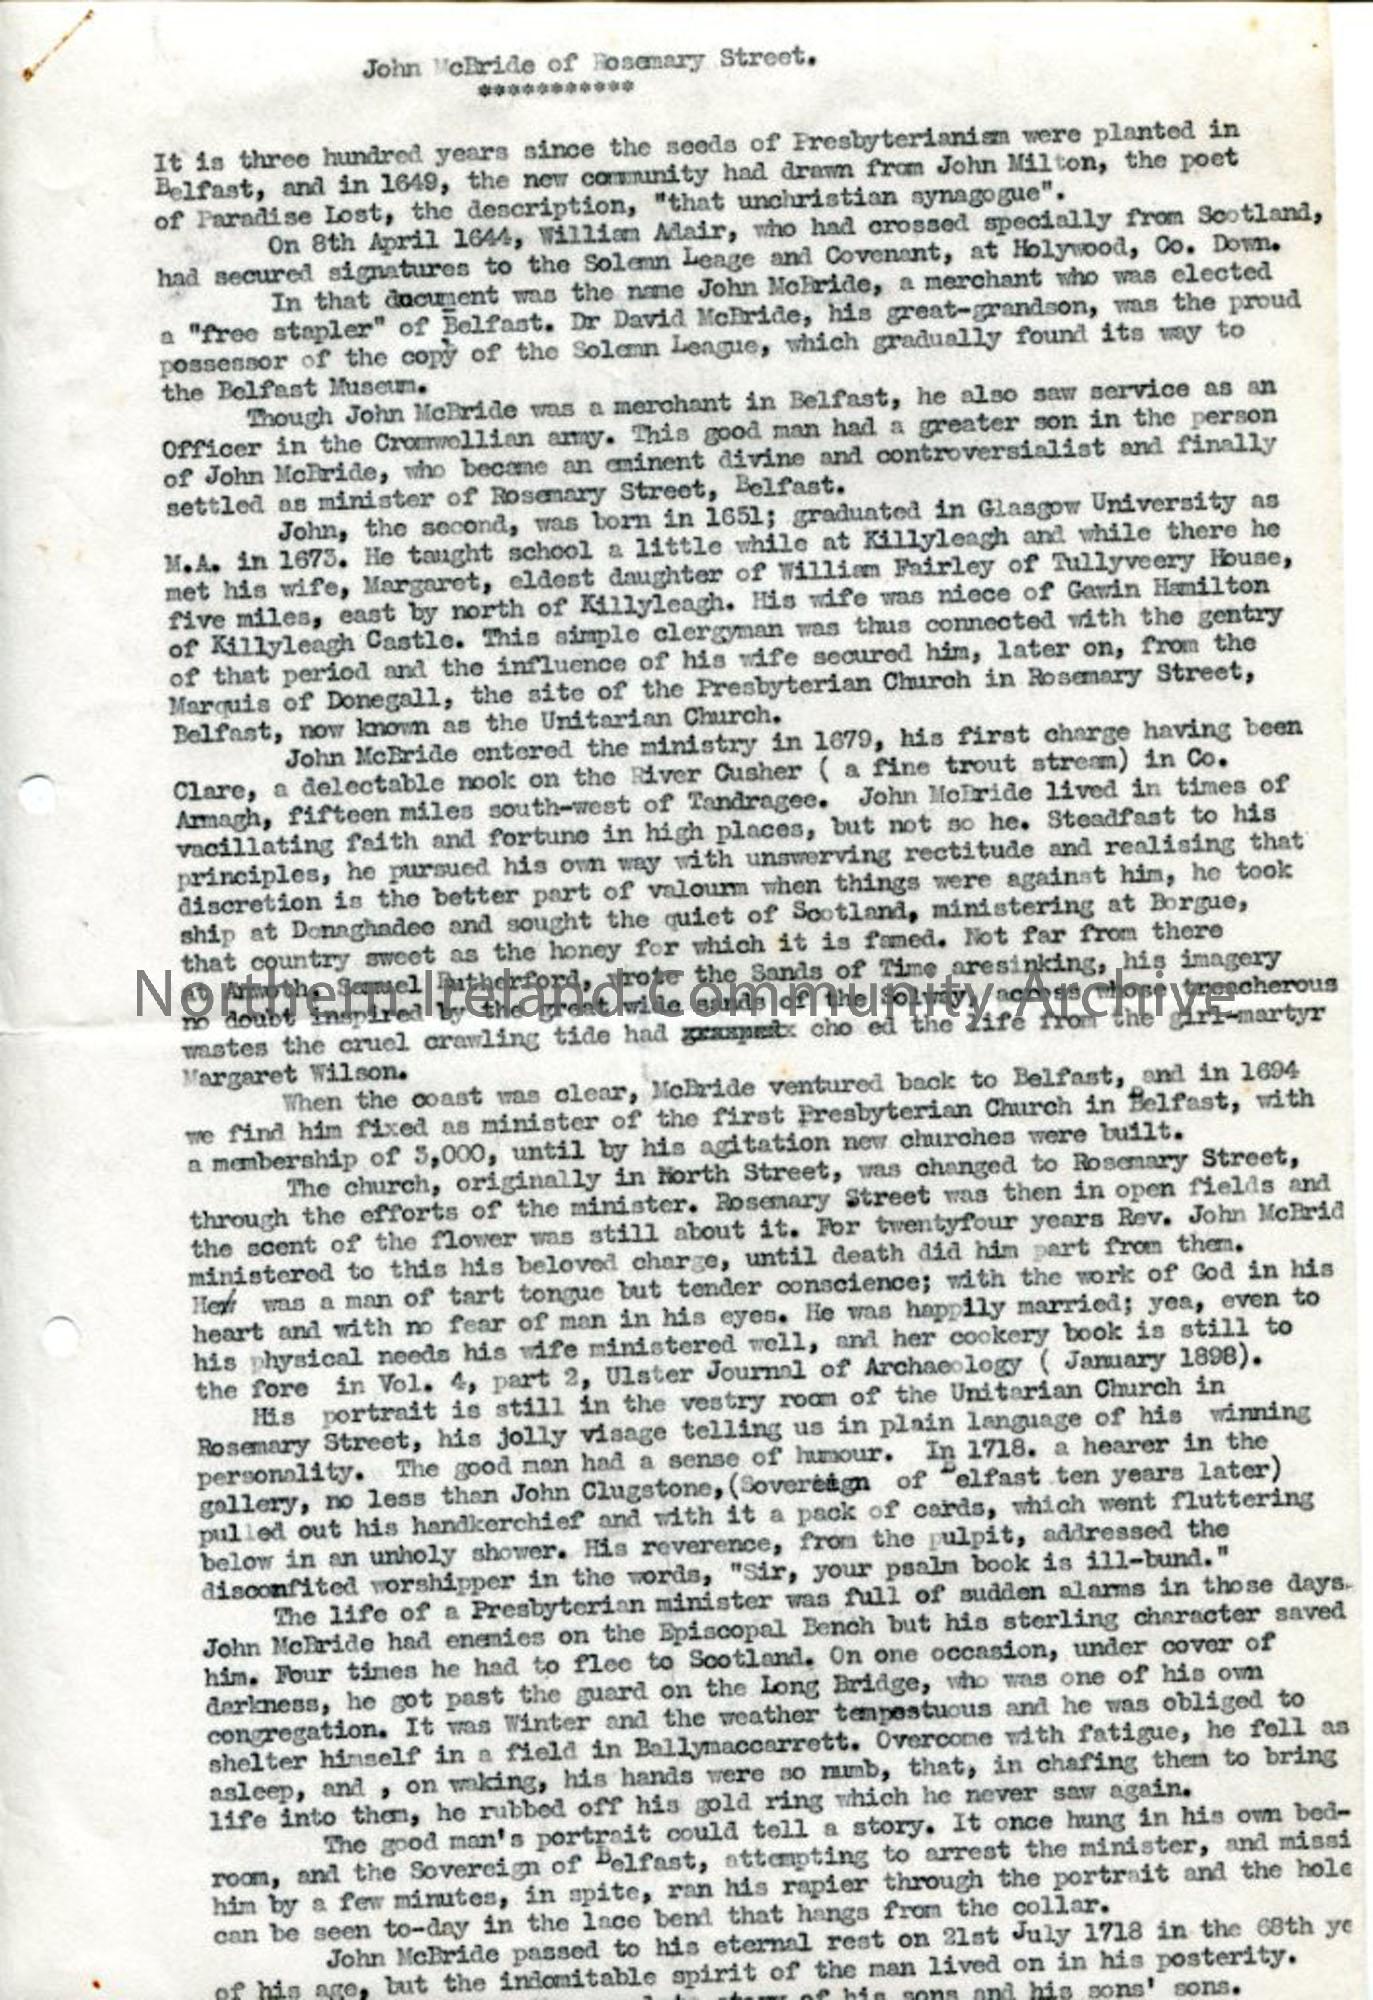 Page 1 of 2: Typed Script on John McBride